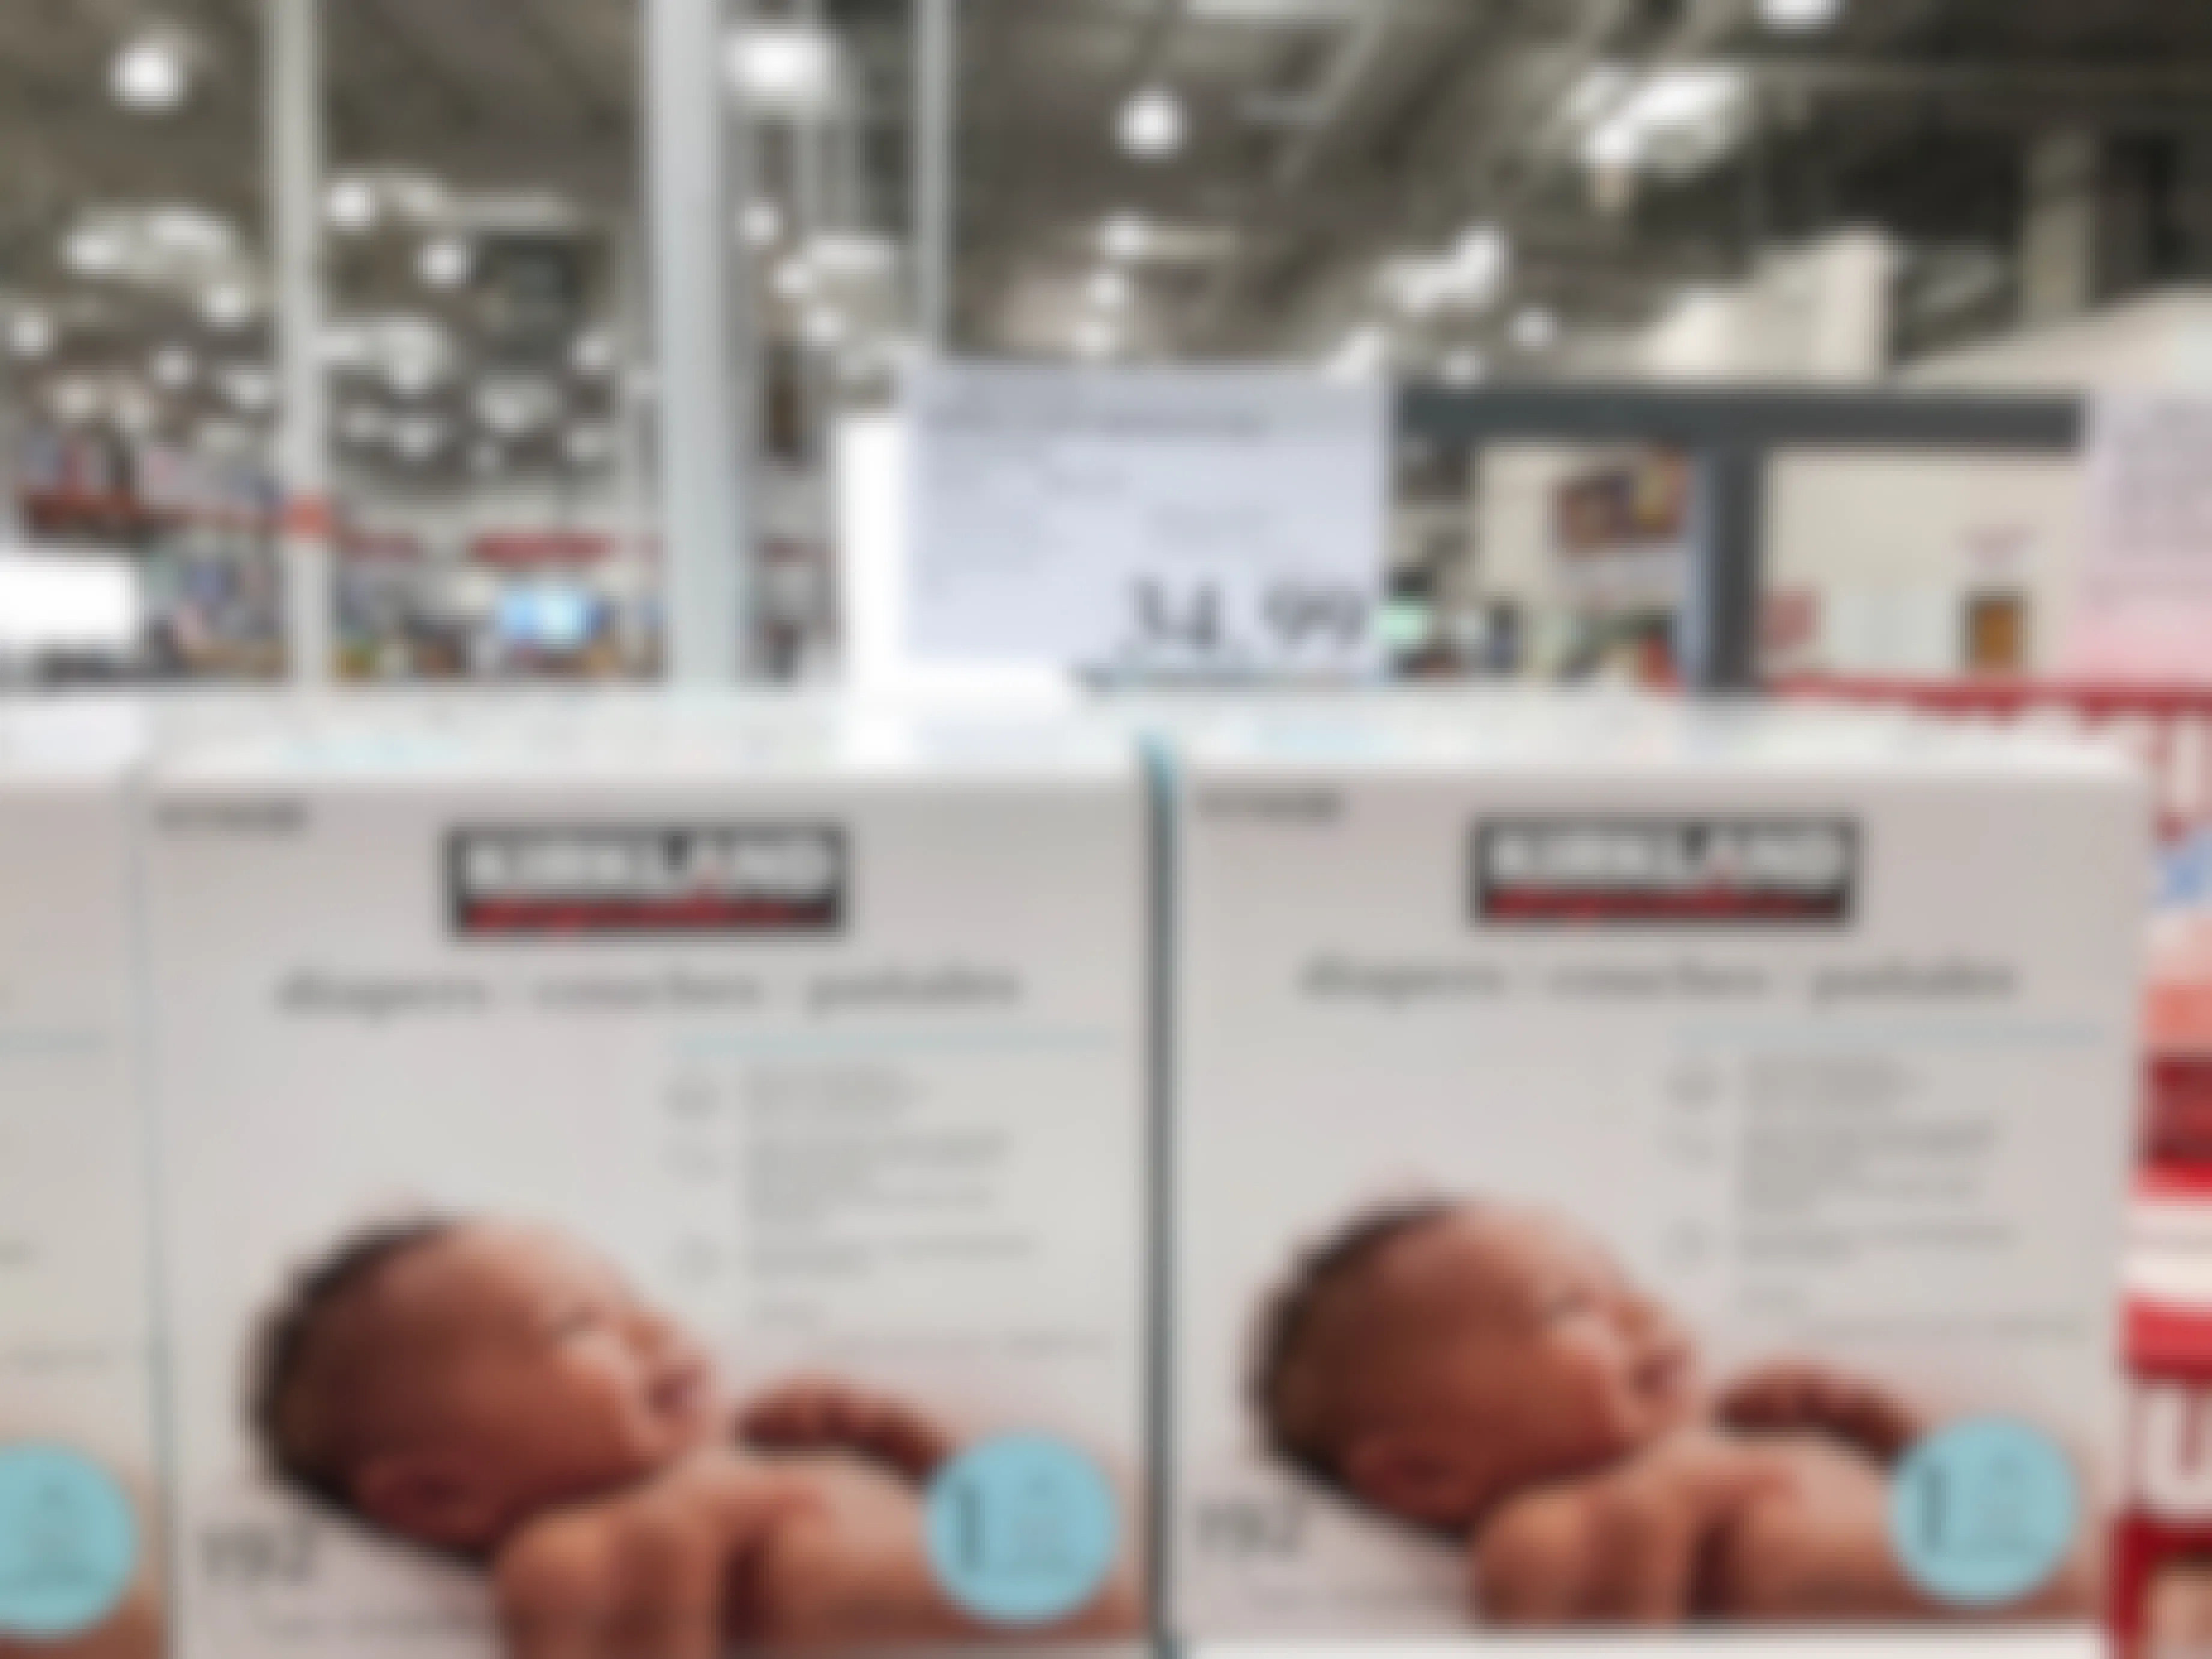 kirkland diapers in a box on display in costco